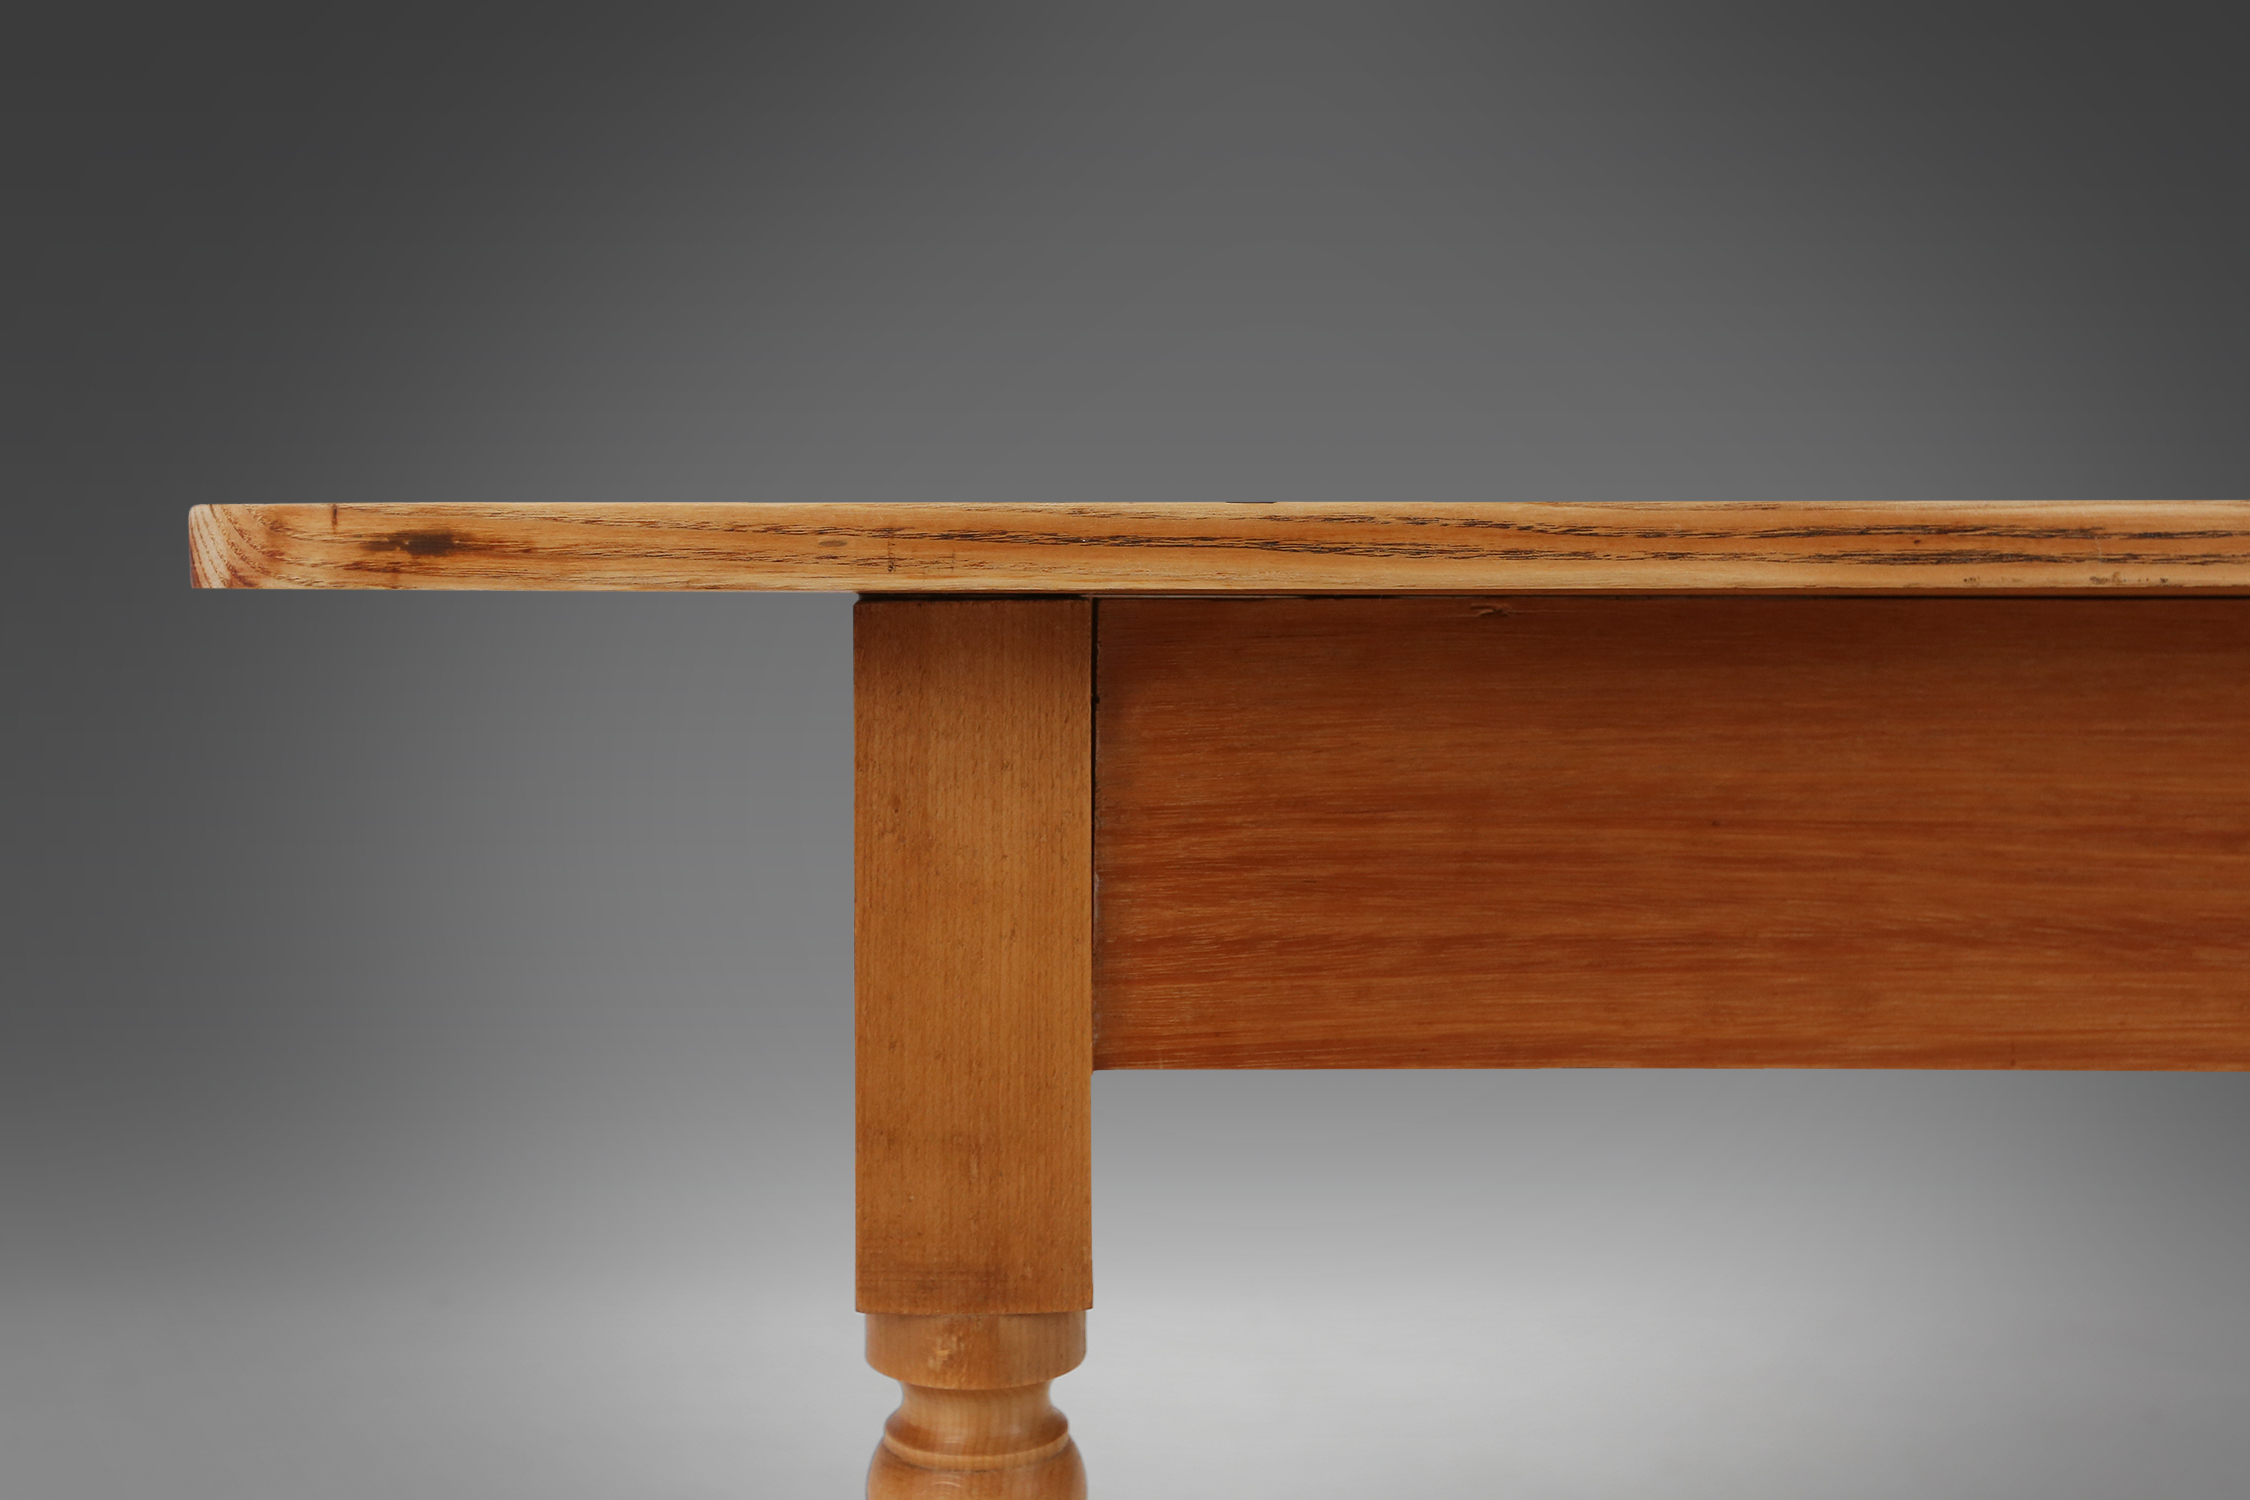 Rustic French farm table in wood with turned legs, ca. 1850thumbnail